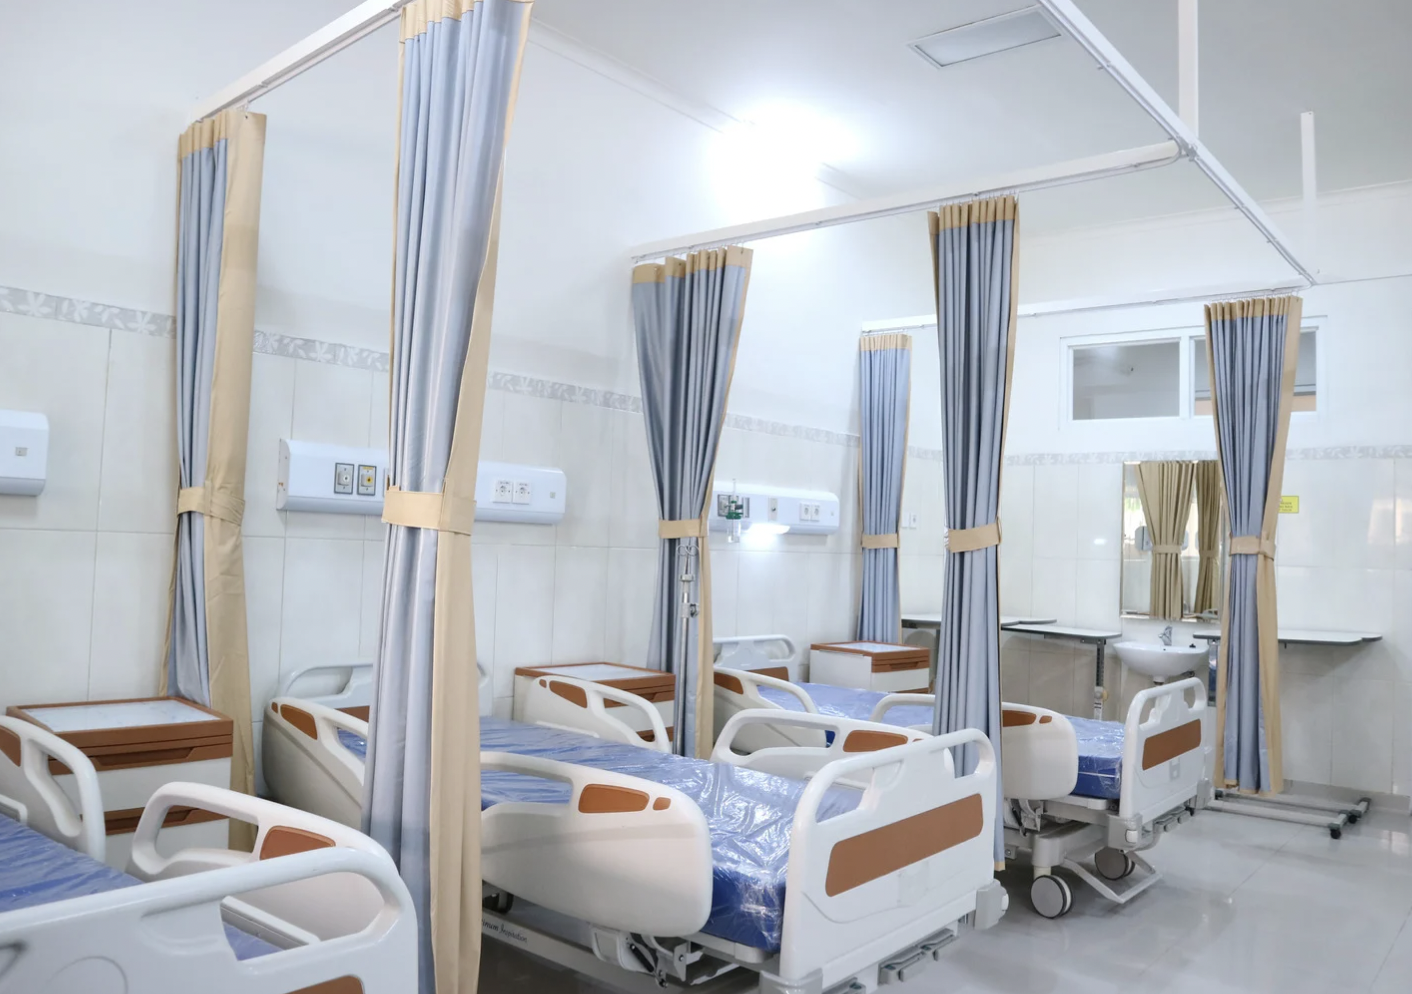 Government requests tenders for 40 new hospital beds